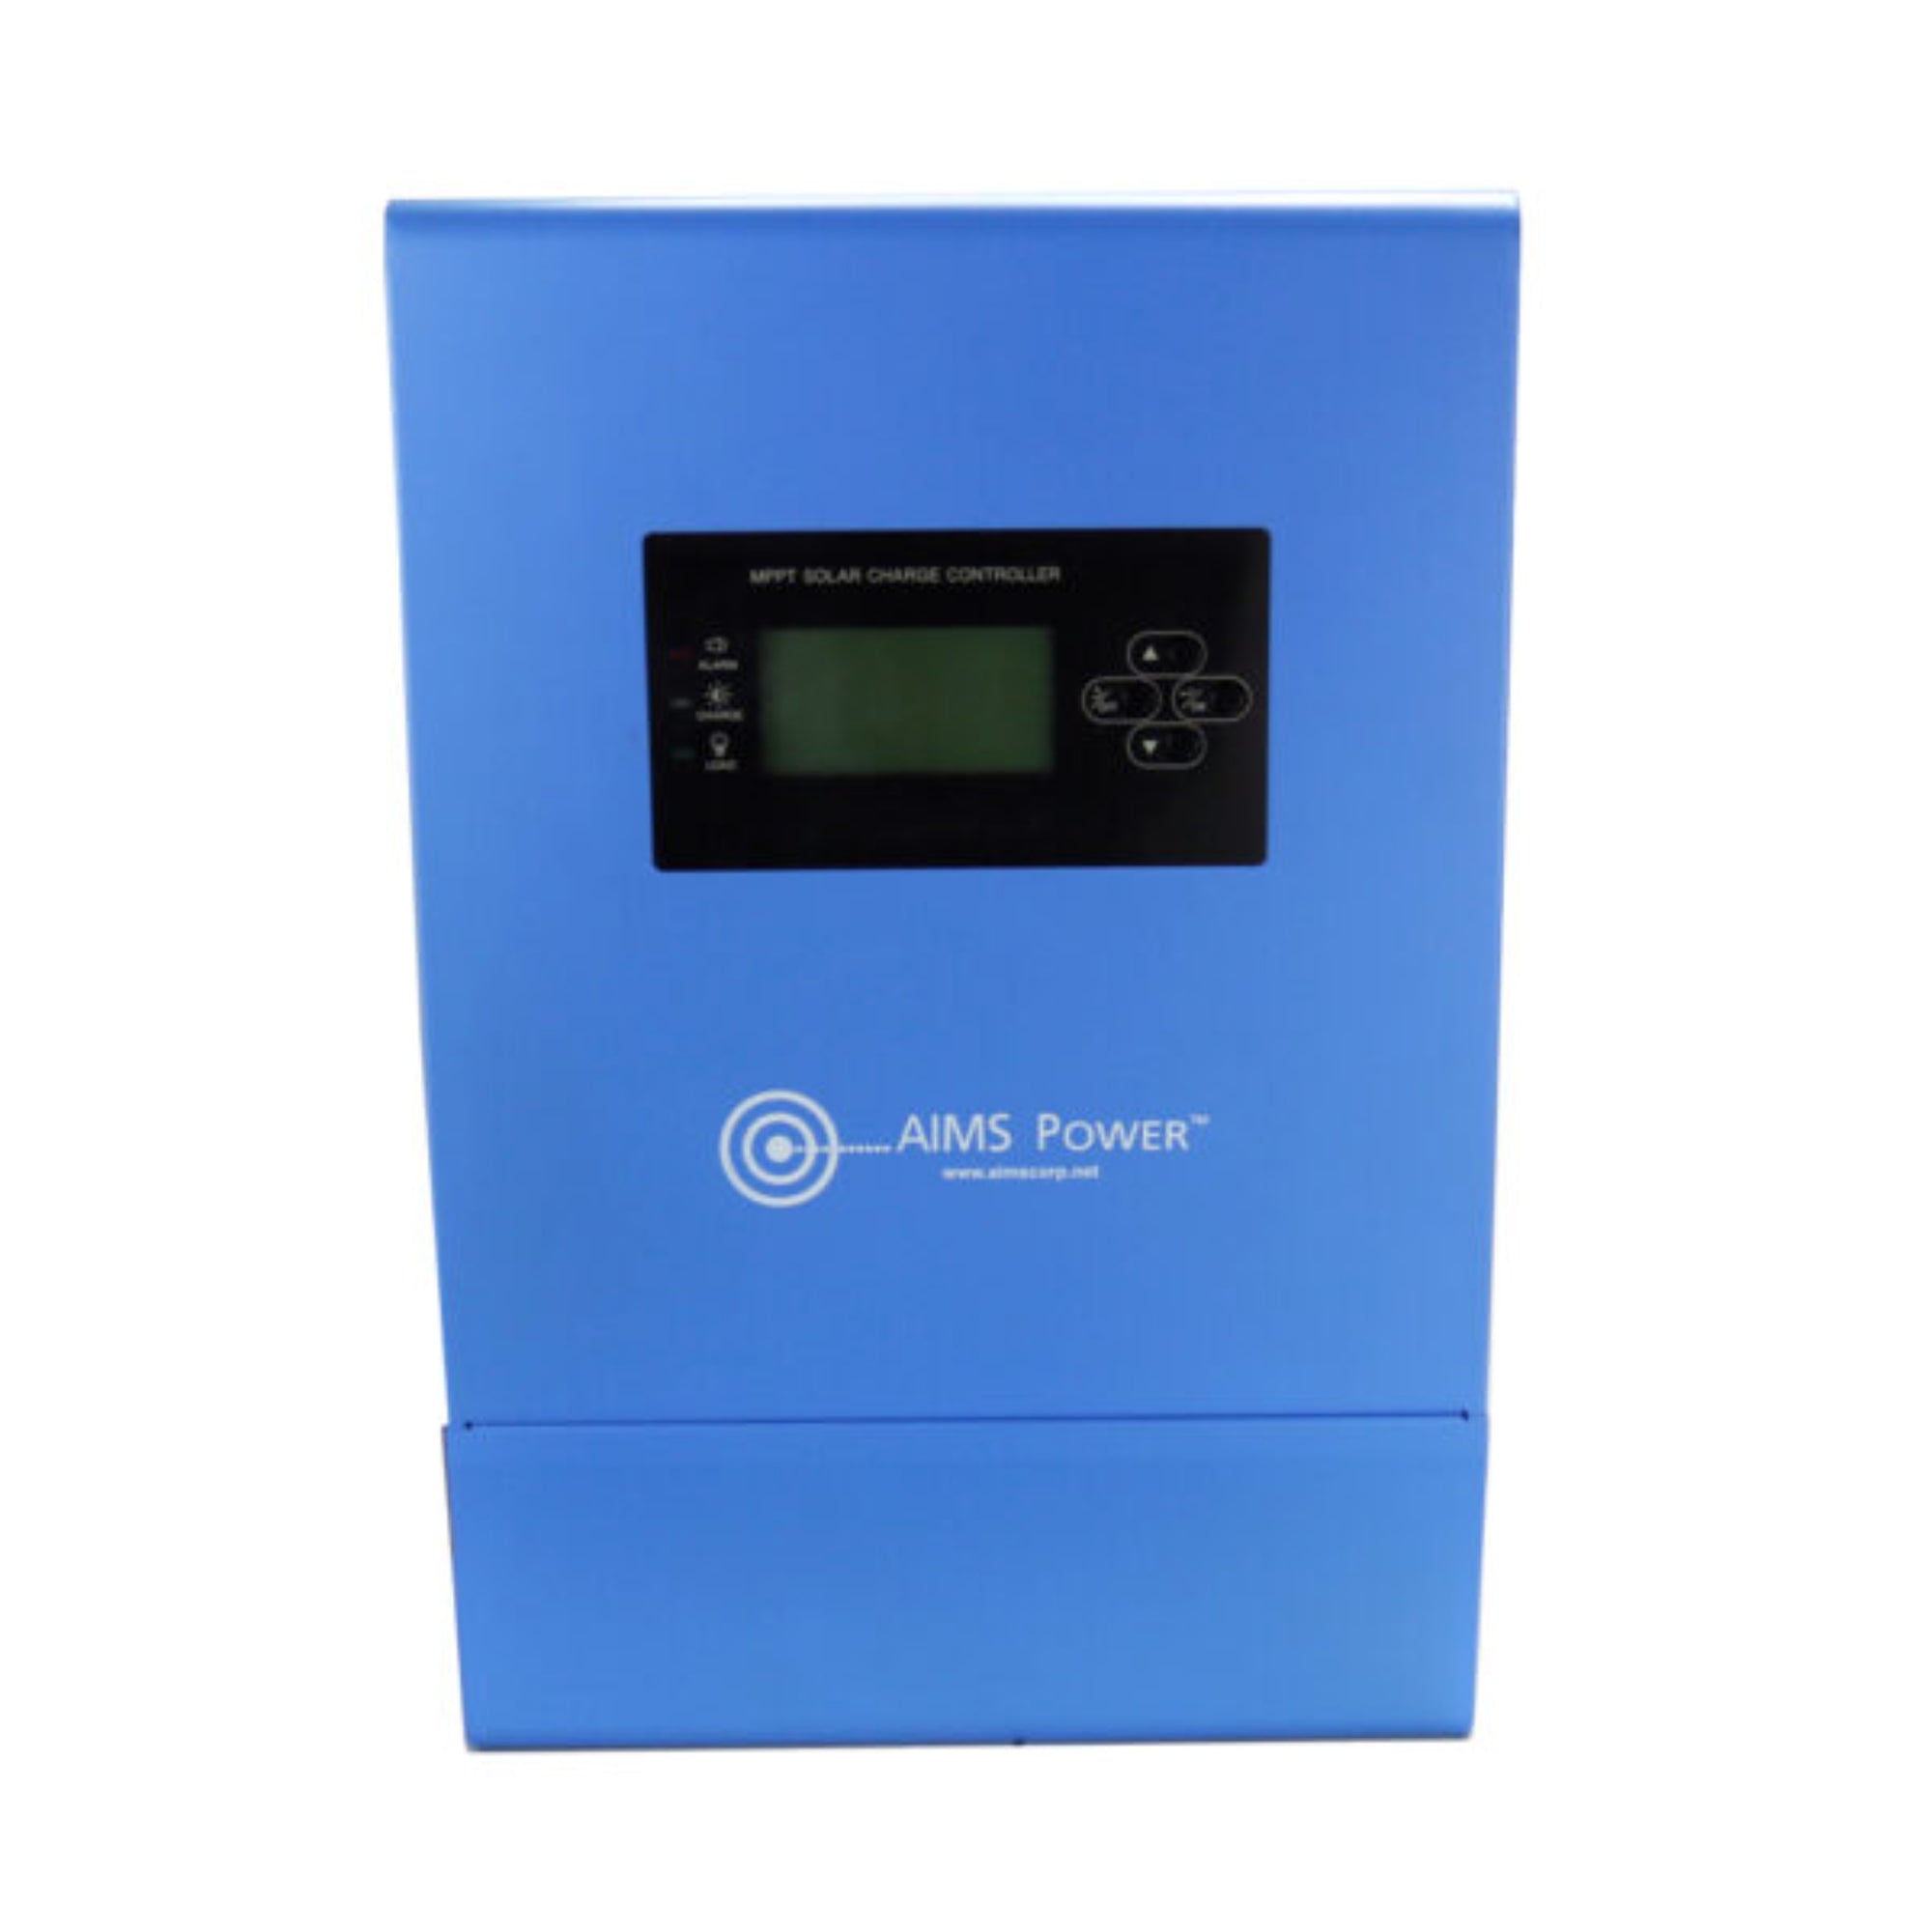 AIMS Power | 100 AMP Solar Charge Controller 12 / 24 / 36 / 48 VDC MPPT